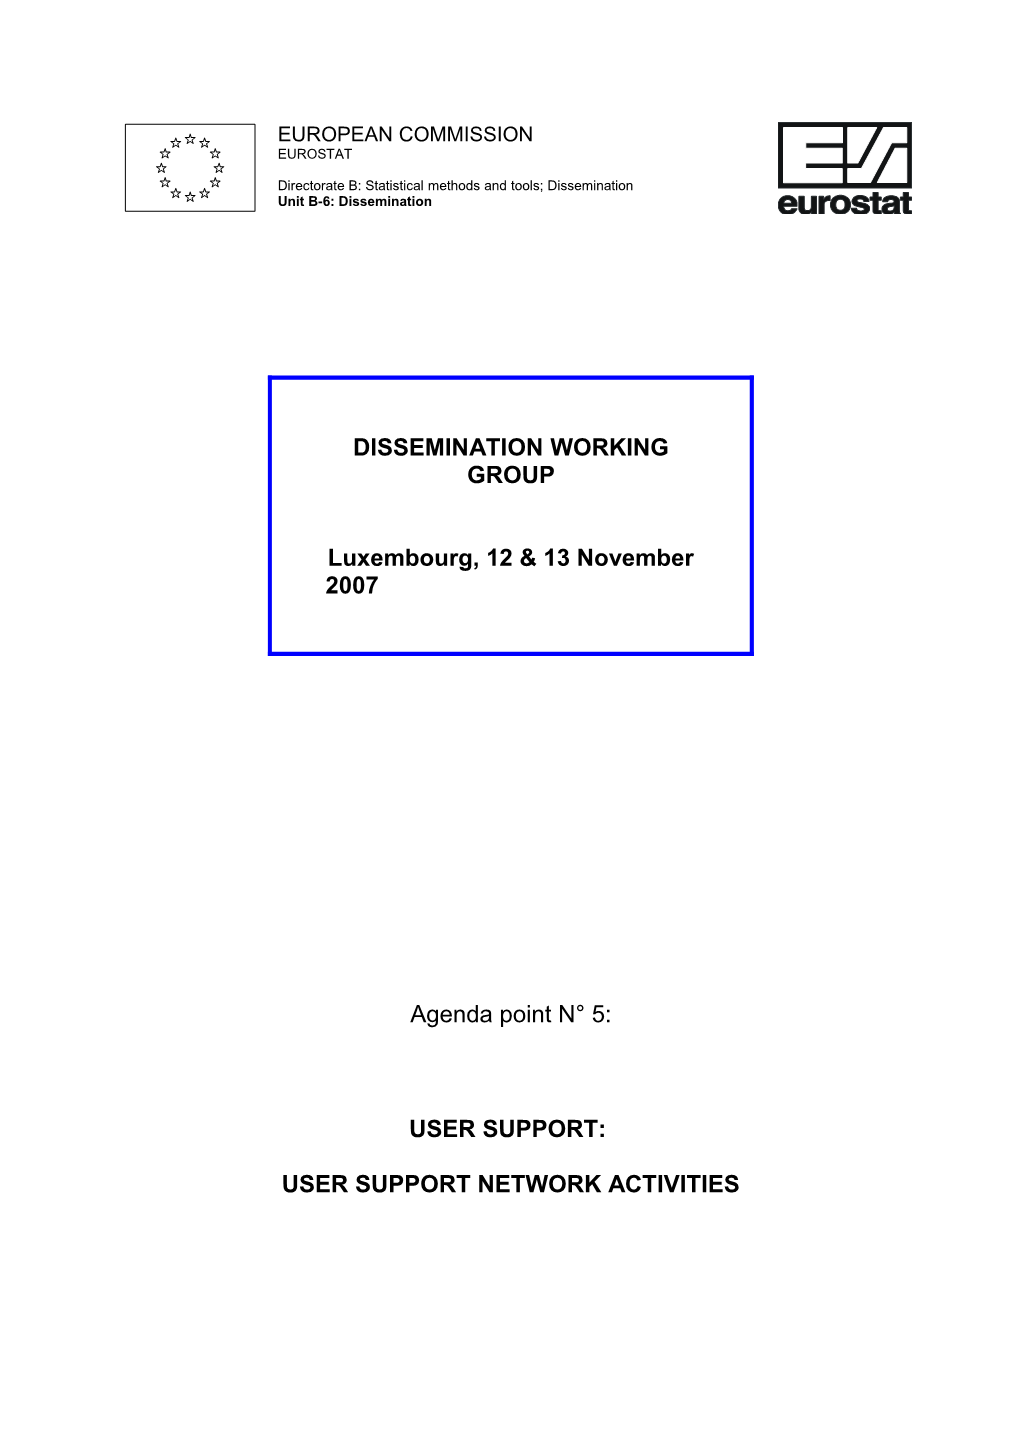 Dissemination Working Group